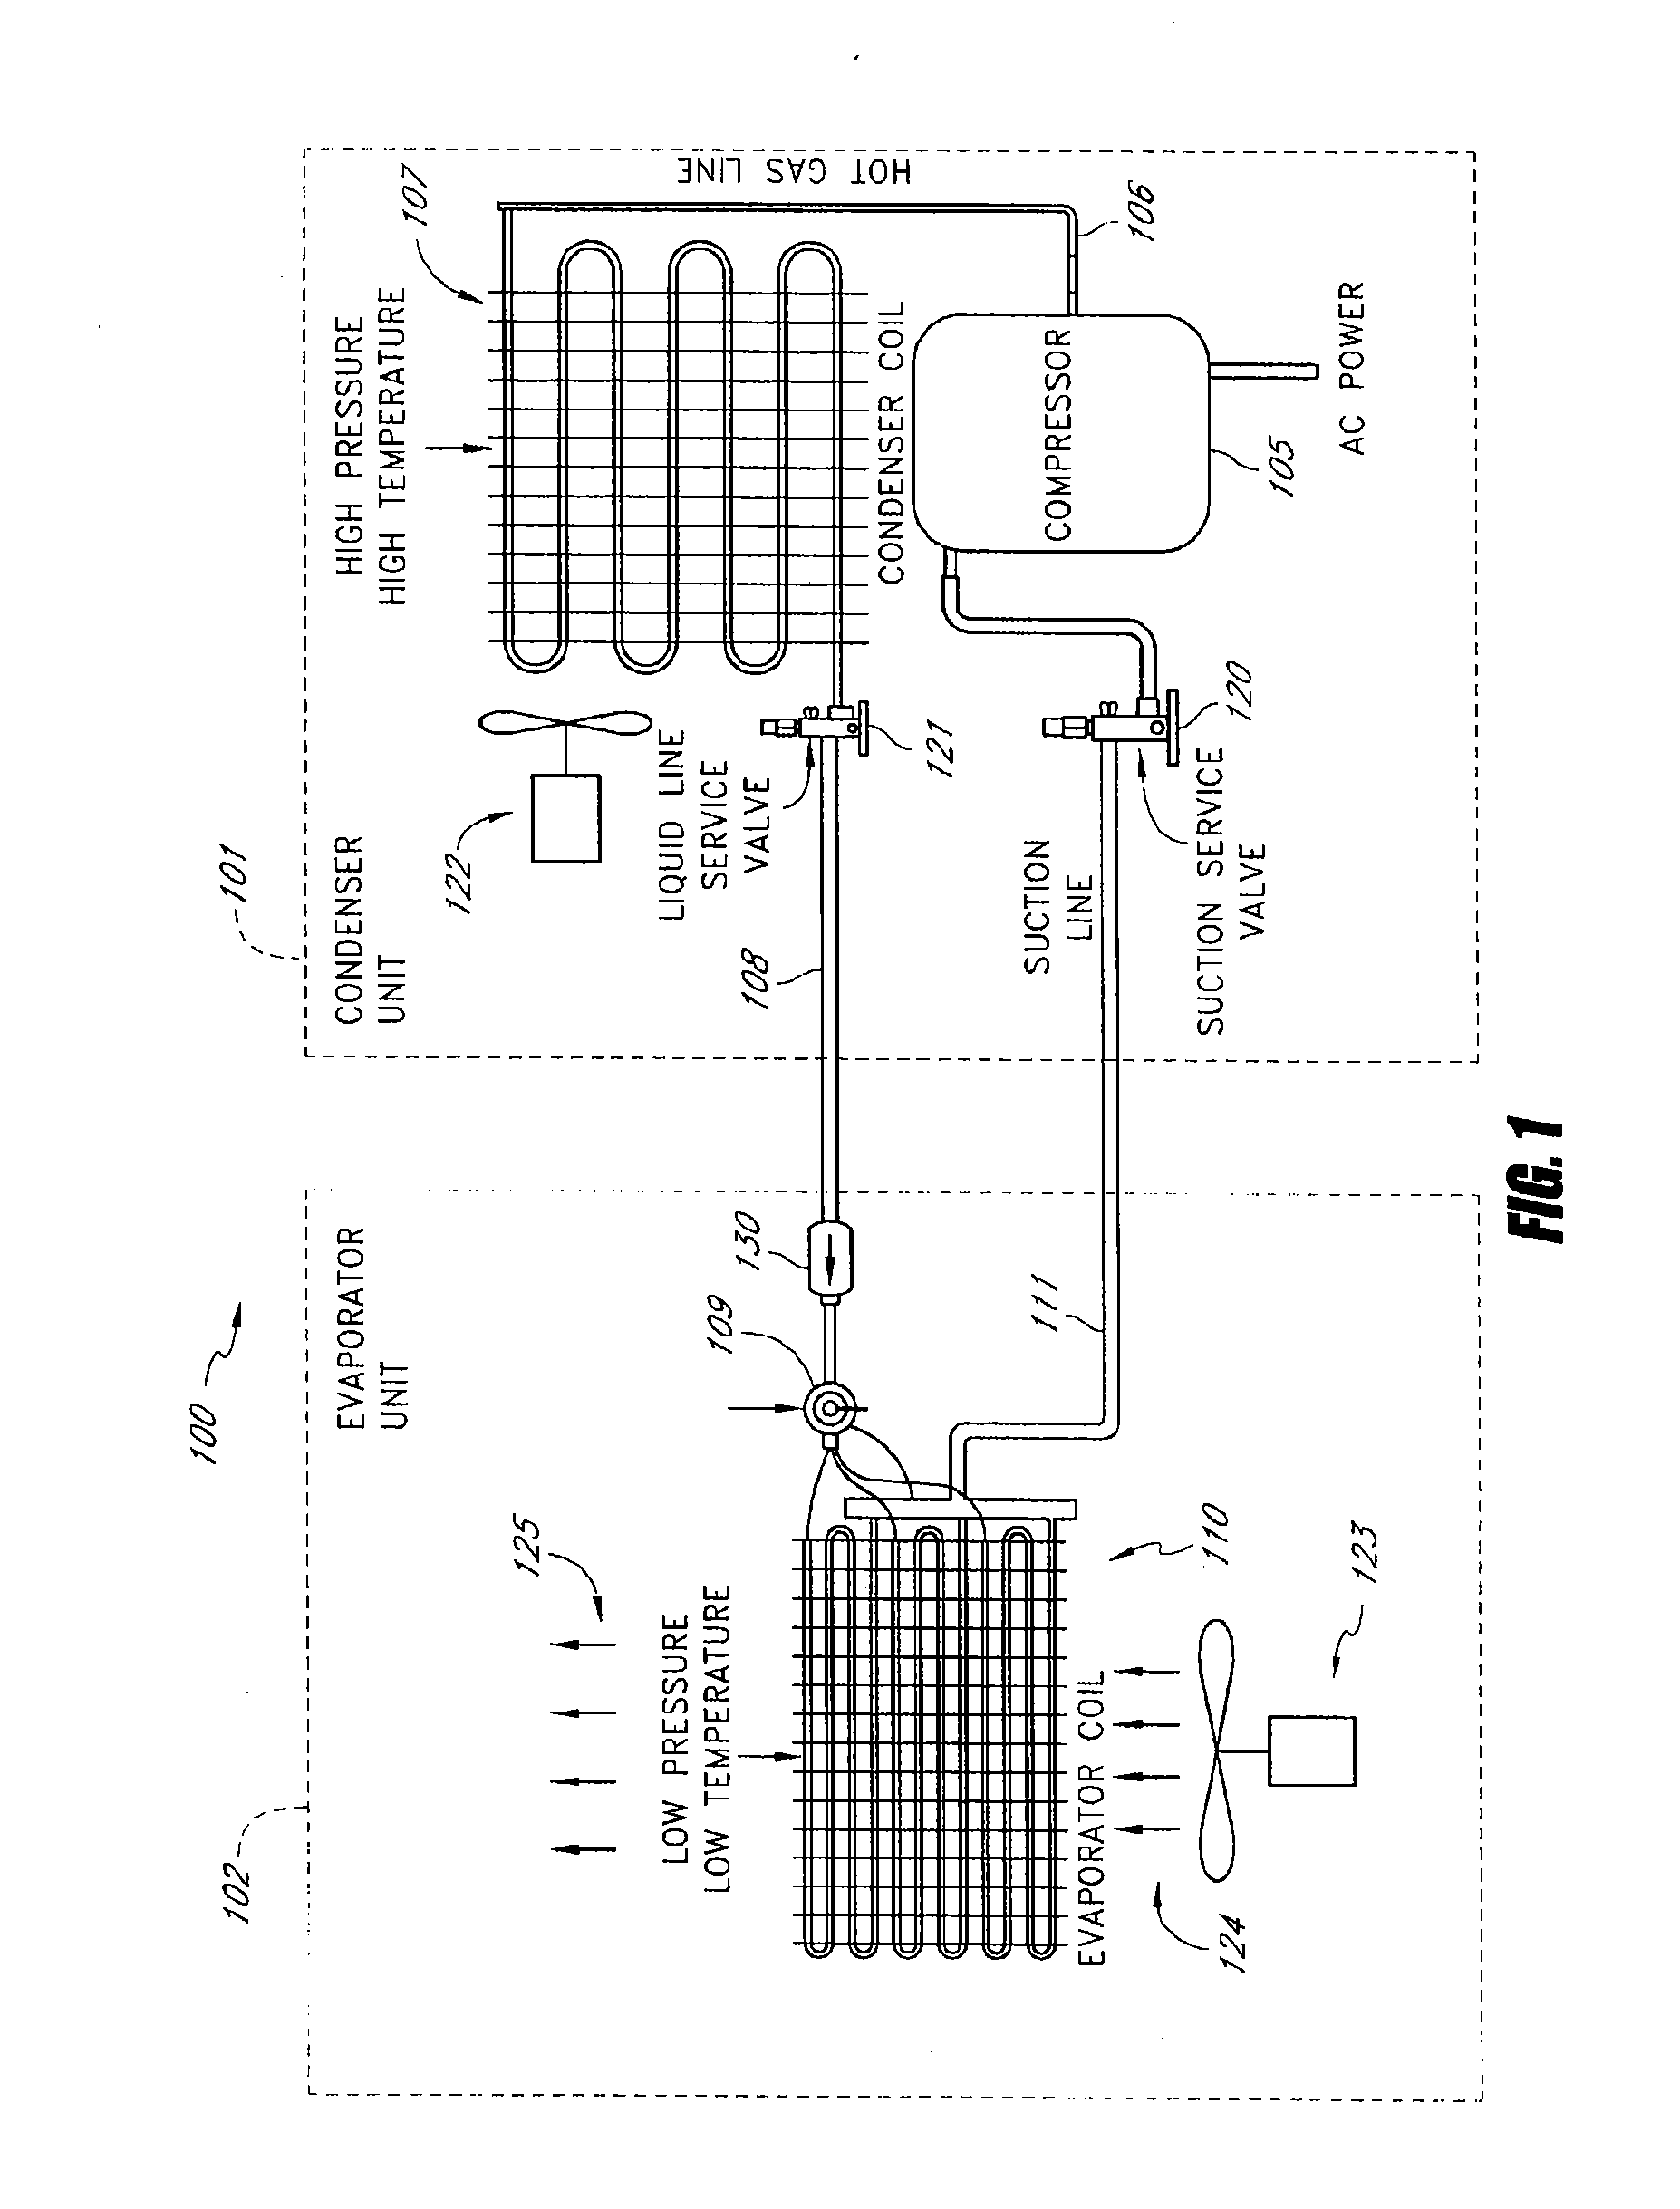 Portable method and apparatus for monitoring refrigerant-cycle systems